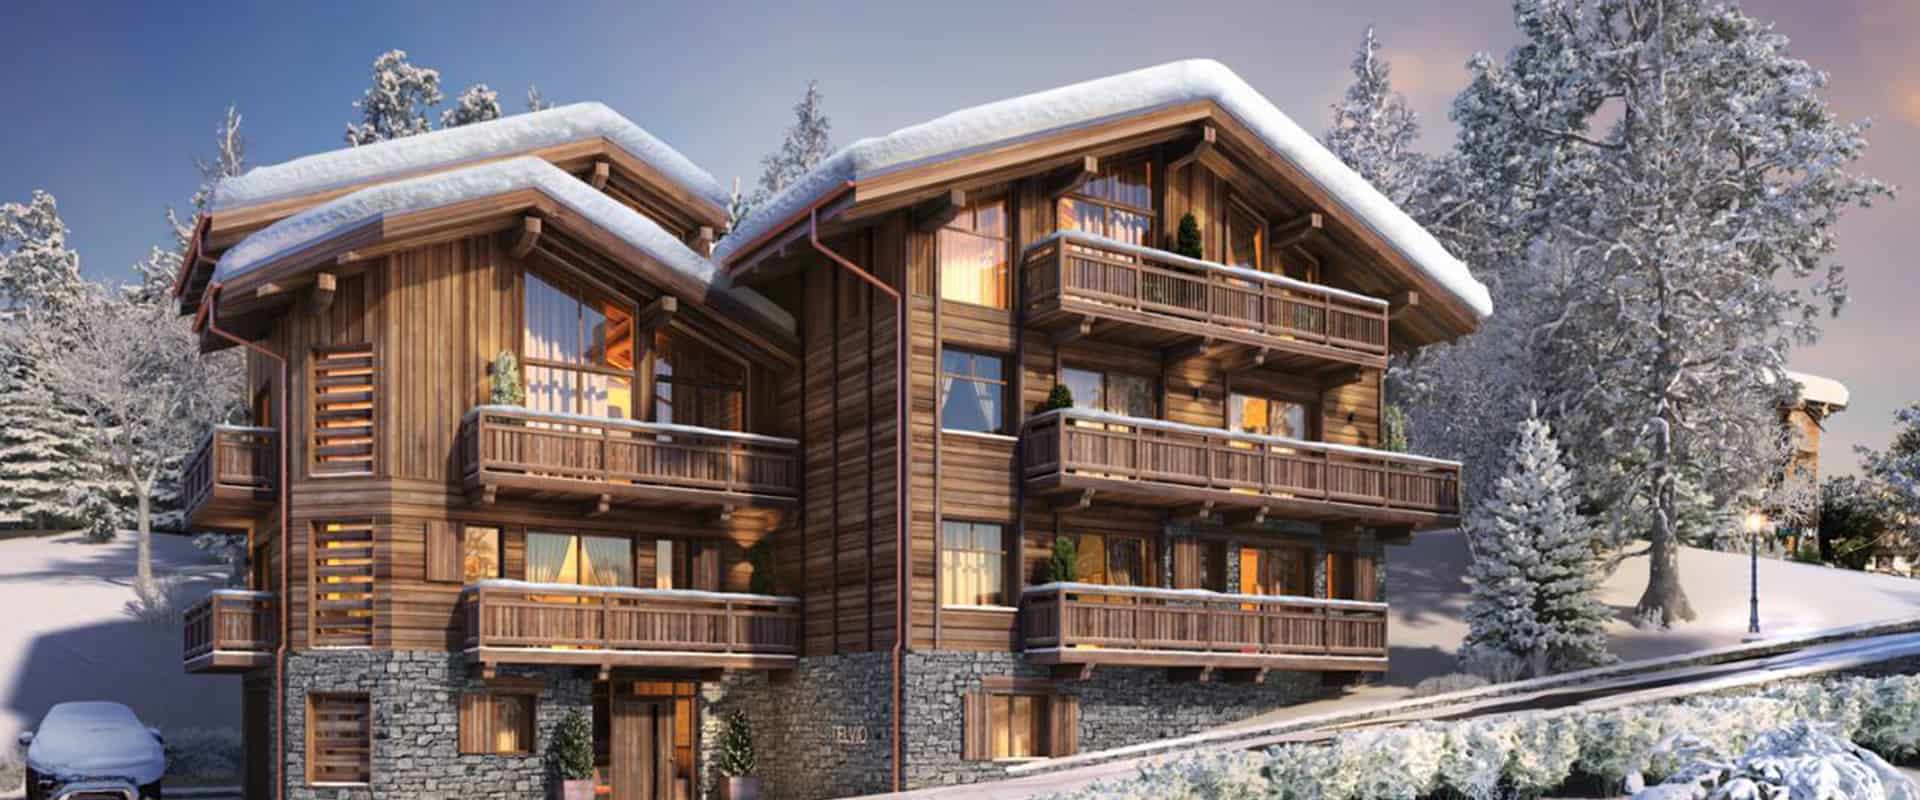 5 bedroom luxury ski property for sale in Courchevel